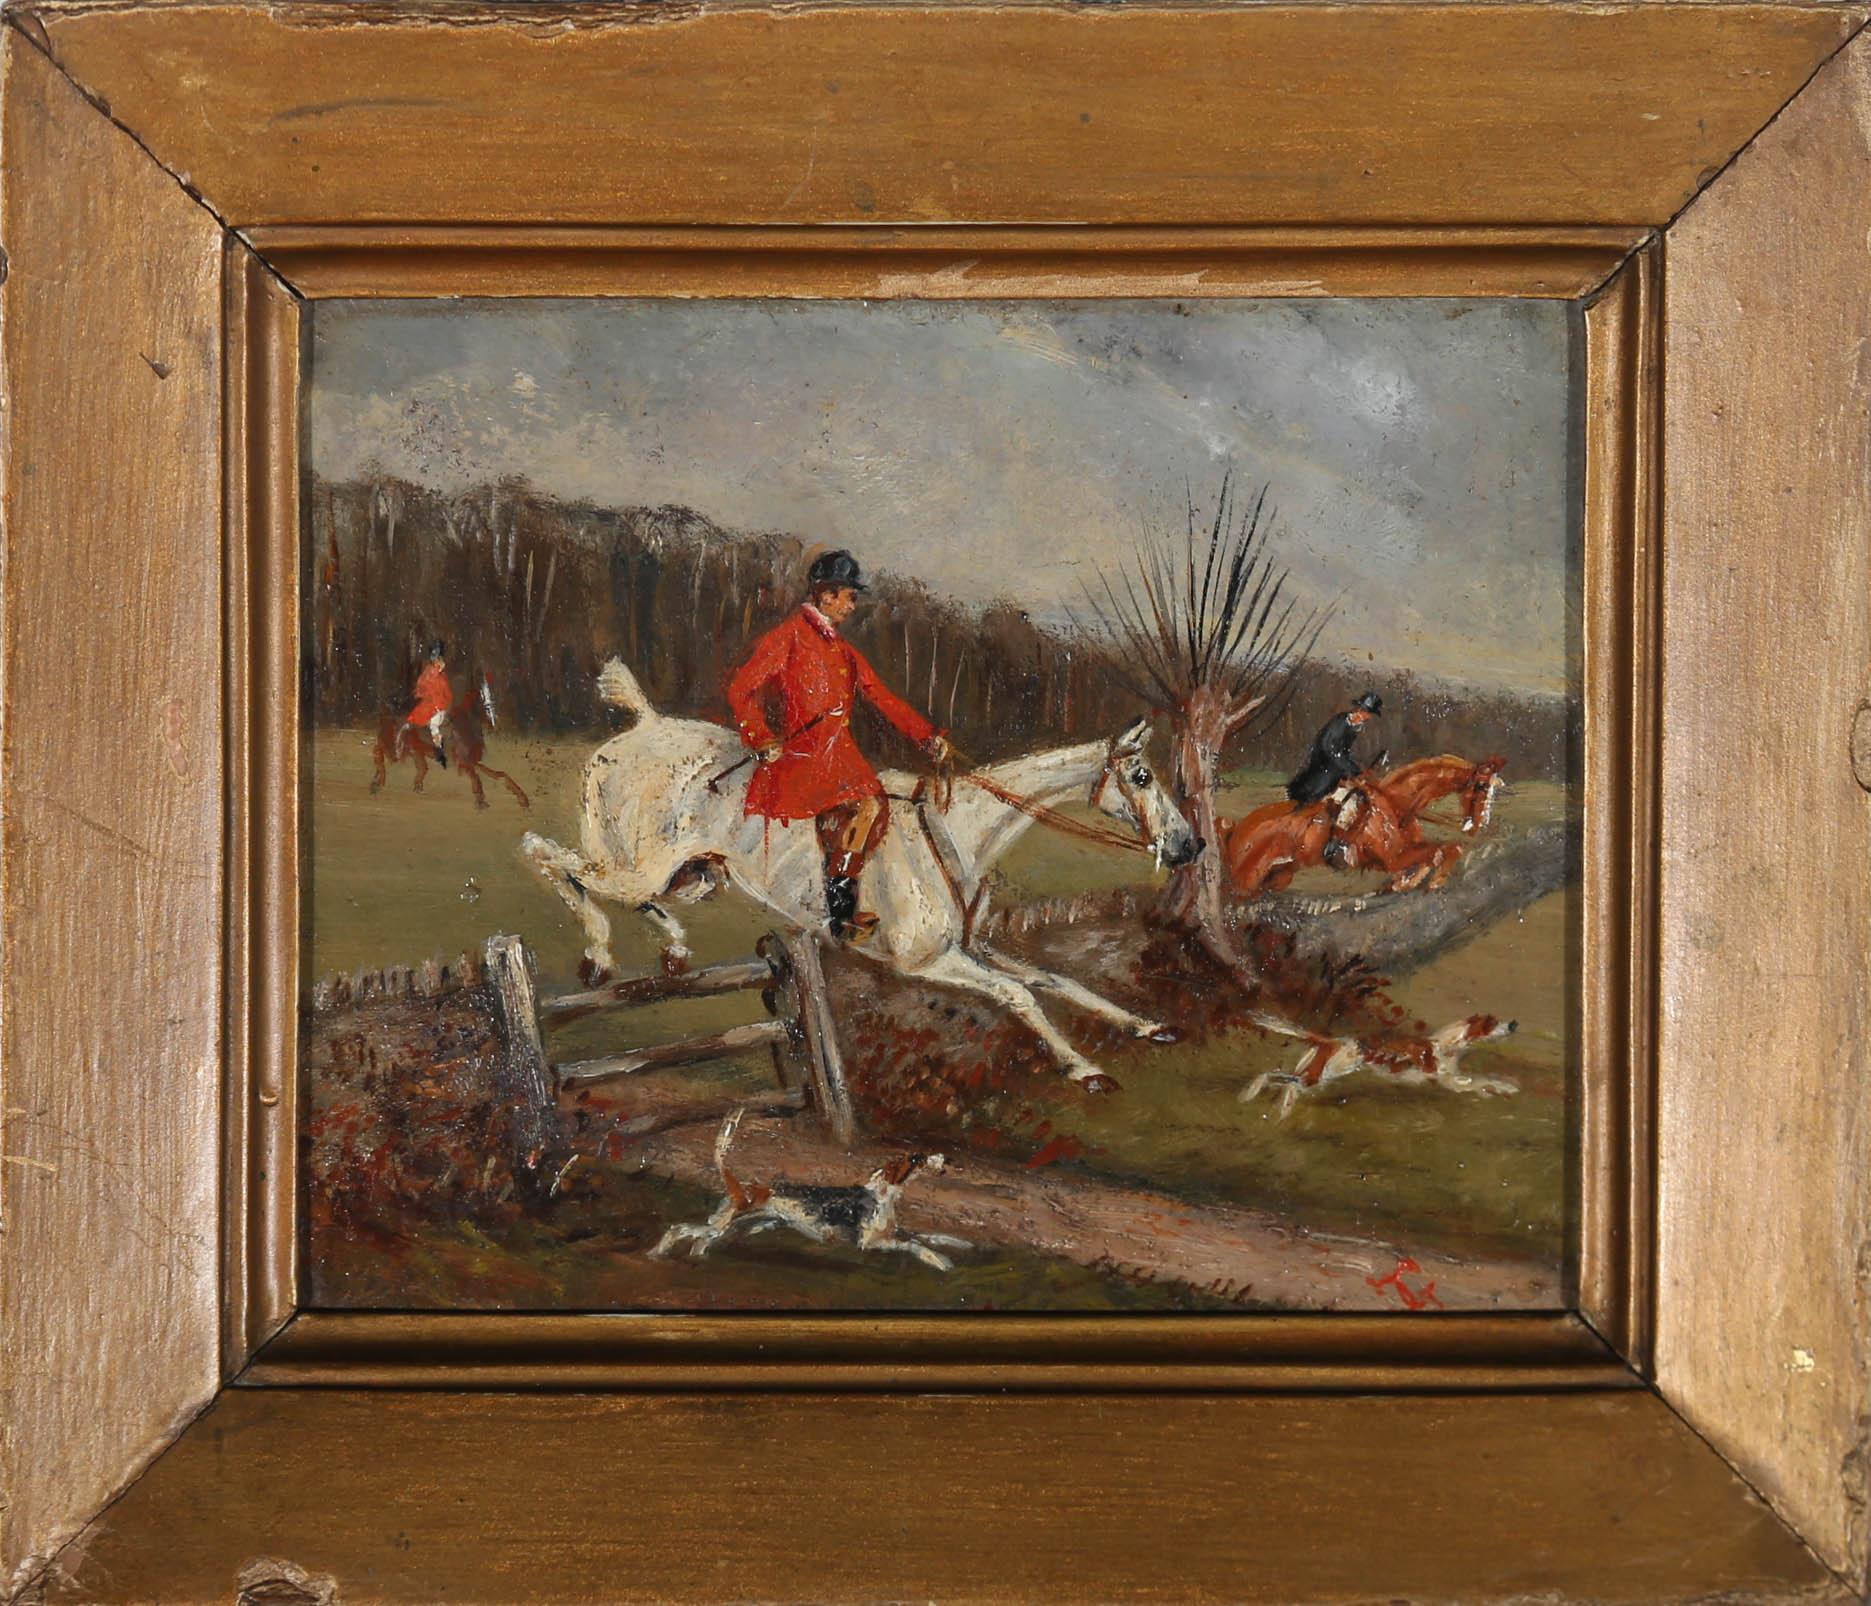 Unknown Landscape Painting - Framed 19th Century Oil - On The Hunt